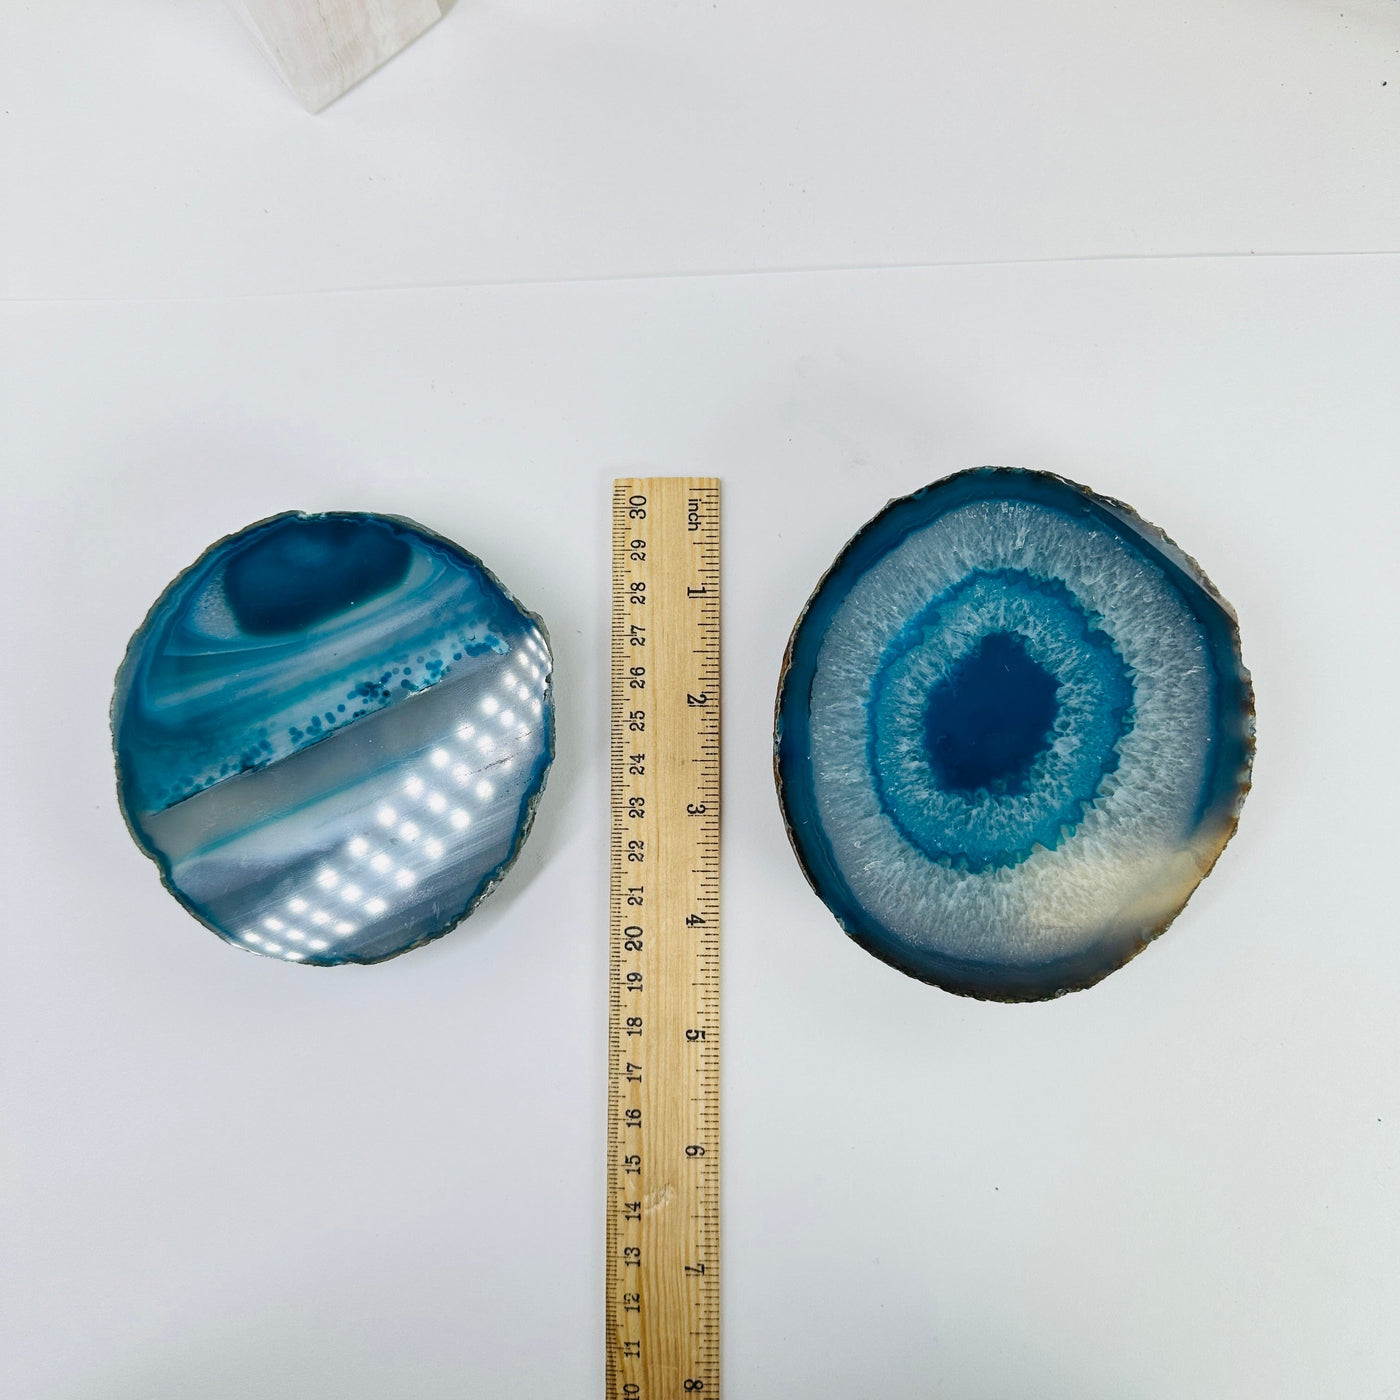 teal agate coaster next to a a ruler for size reference